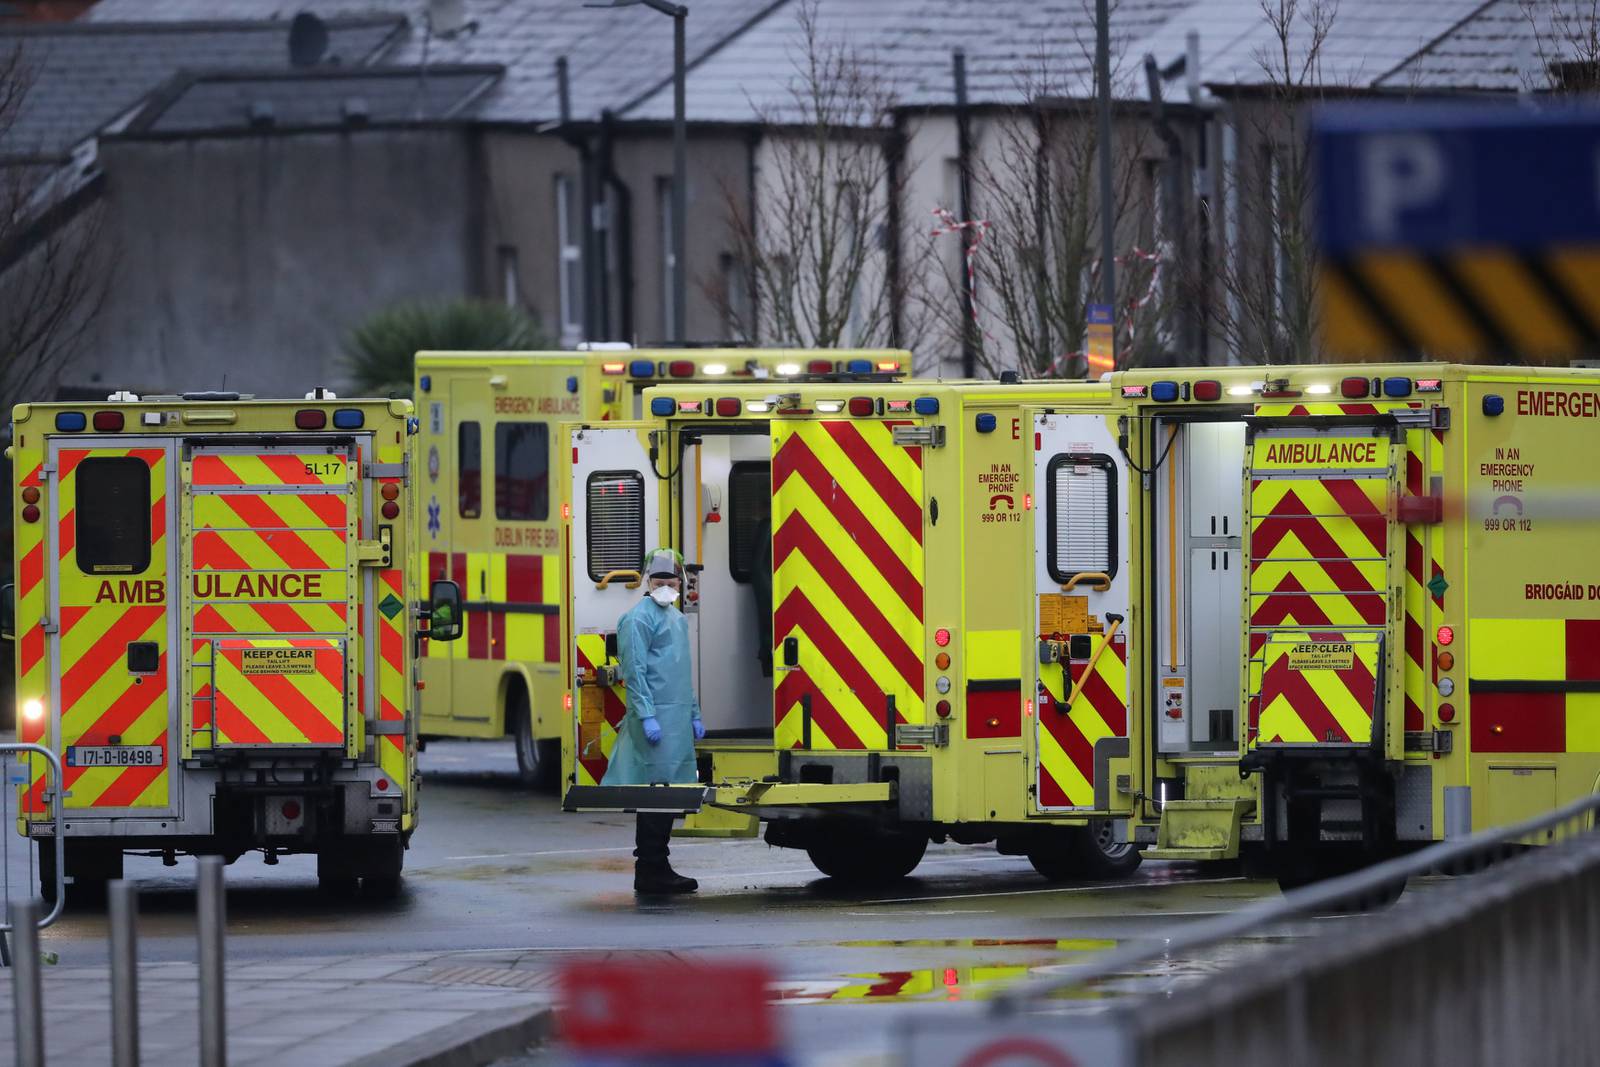 A medic in PPE and ambulances outside the Accident and Emergency department at the Mater Hospital in Dublin. Deputy chief medical officer Dr Ronan Glynn has warned significant levels of Covid-19 mortality lie ahead for Ireland and "hospitals are under intense pressure". Picture date: Monday January 18, 2021. PA Photo. See PA story IRISH Coronavirus. Photo credit should read: Niall Carson/PA Wire